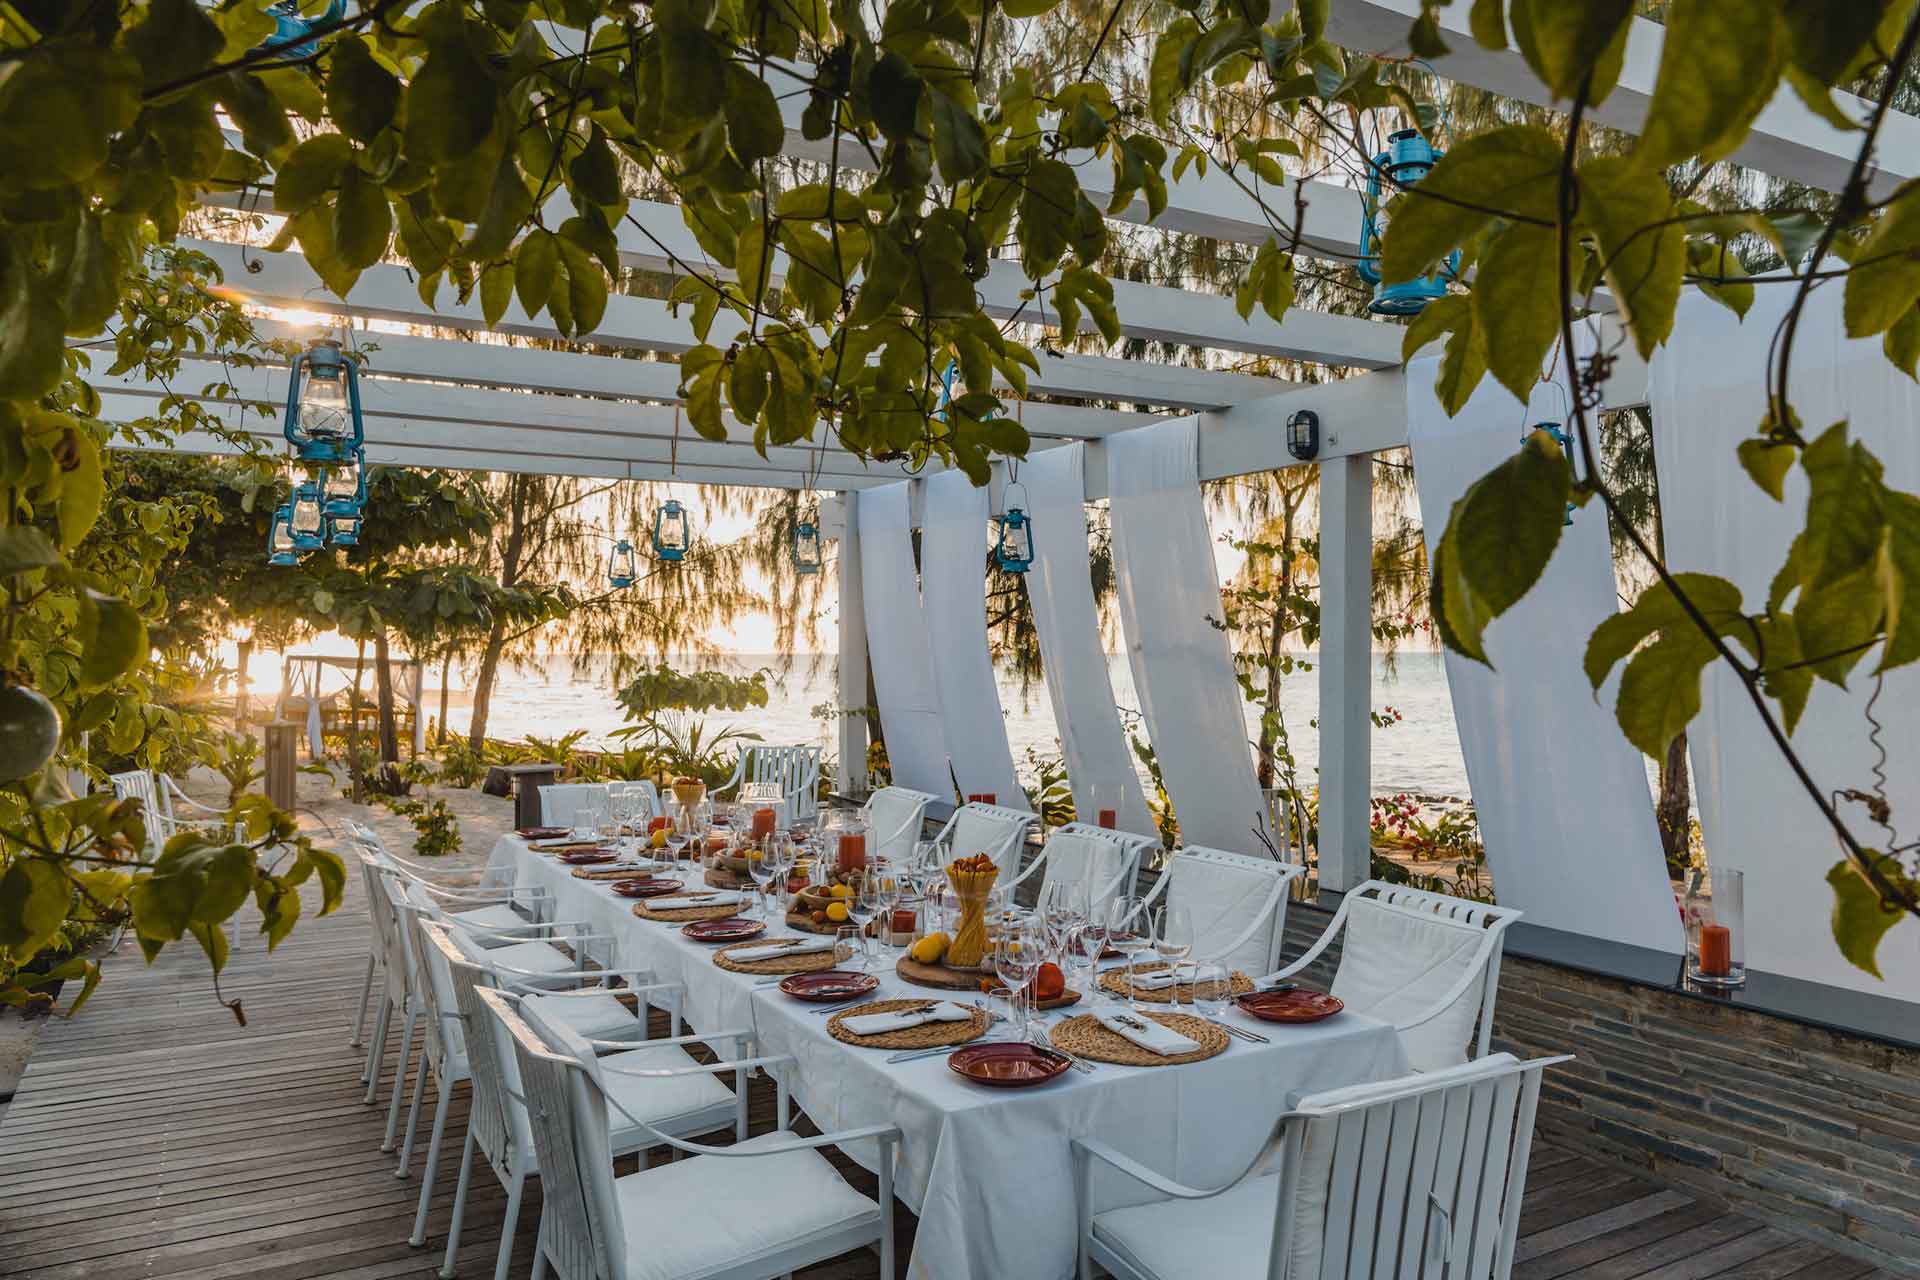 Outdoor dining under a canopy covered in foliage